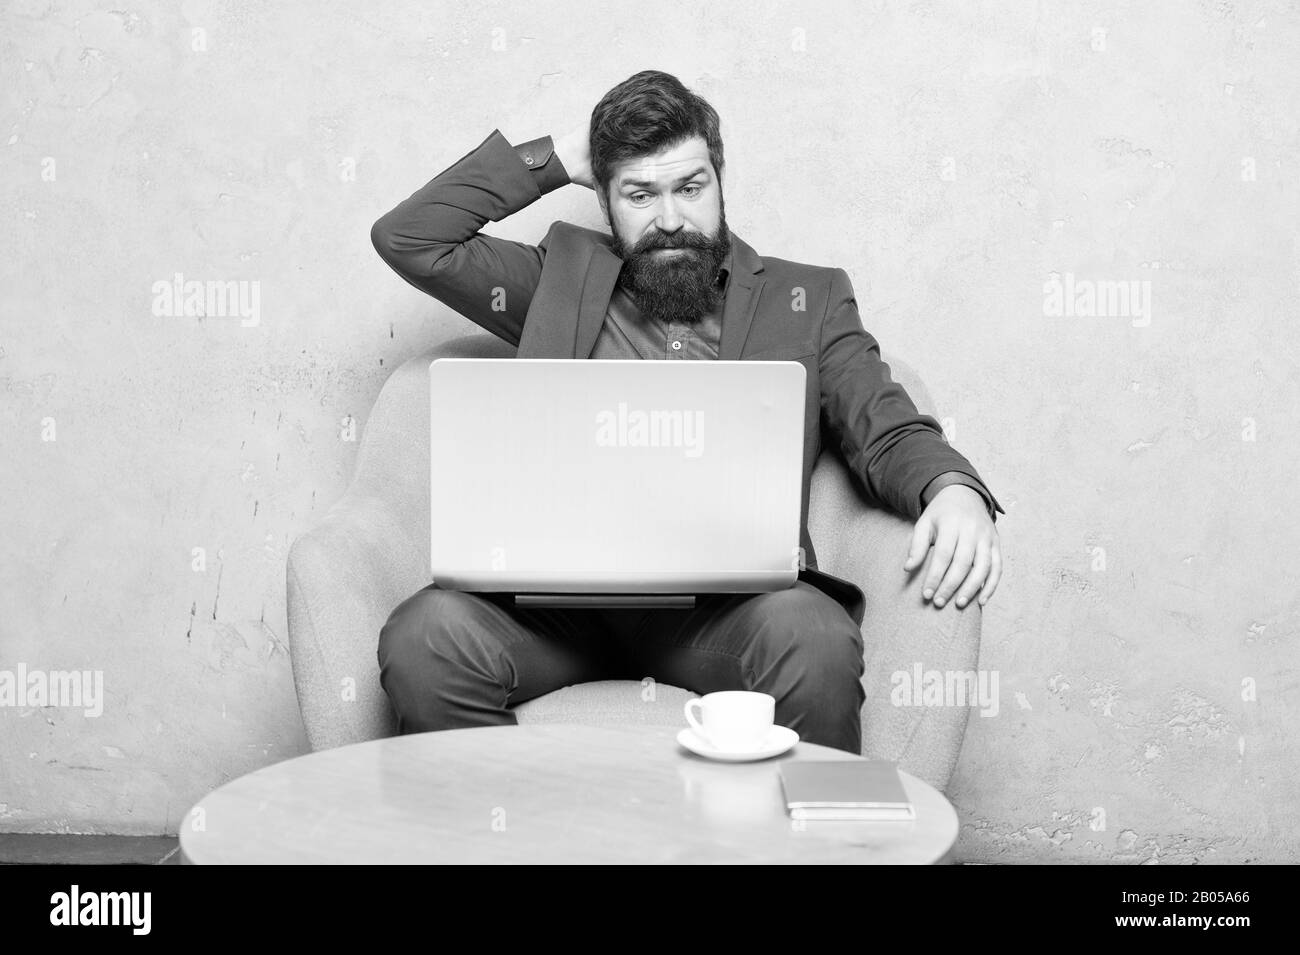 Watching blog for financial information. Businessman posting on online social network or blog at workplace. Bearded man writing new blog post in office. Blogger keeping his private blog. Stock Photo